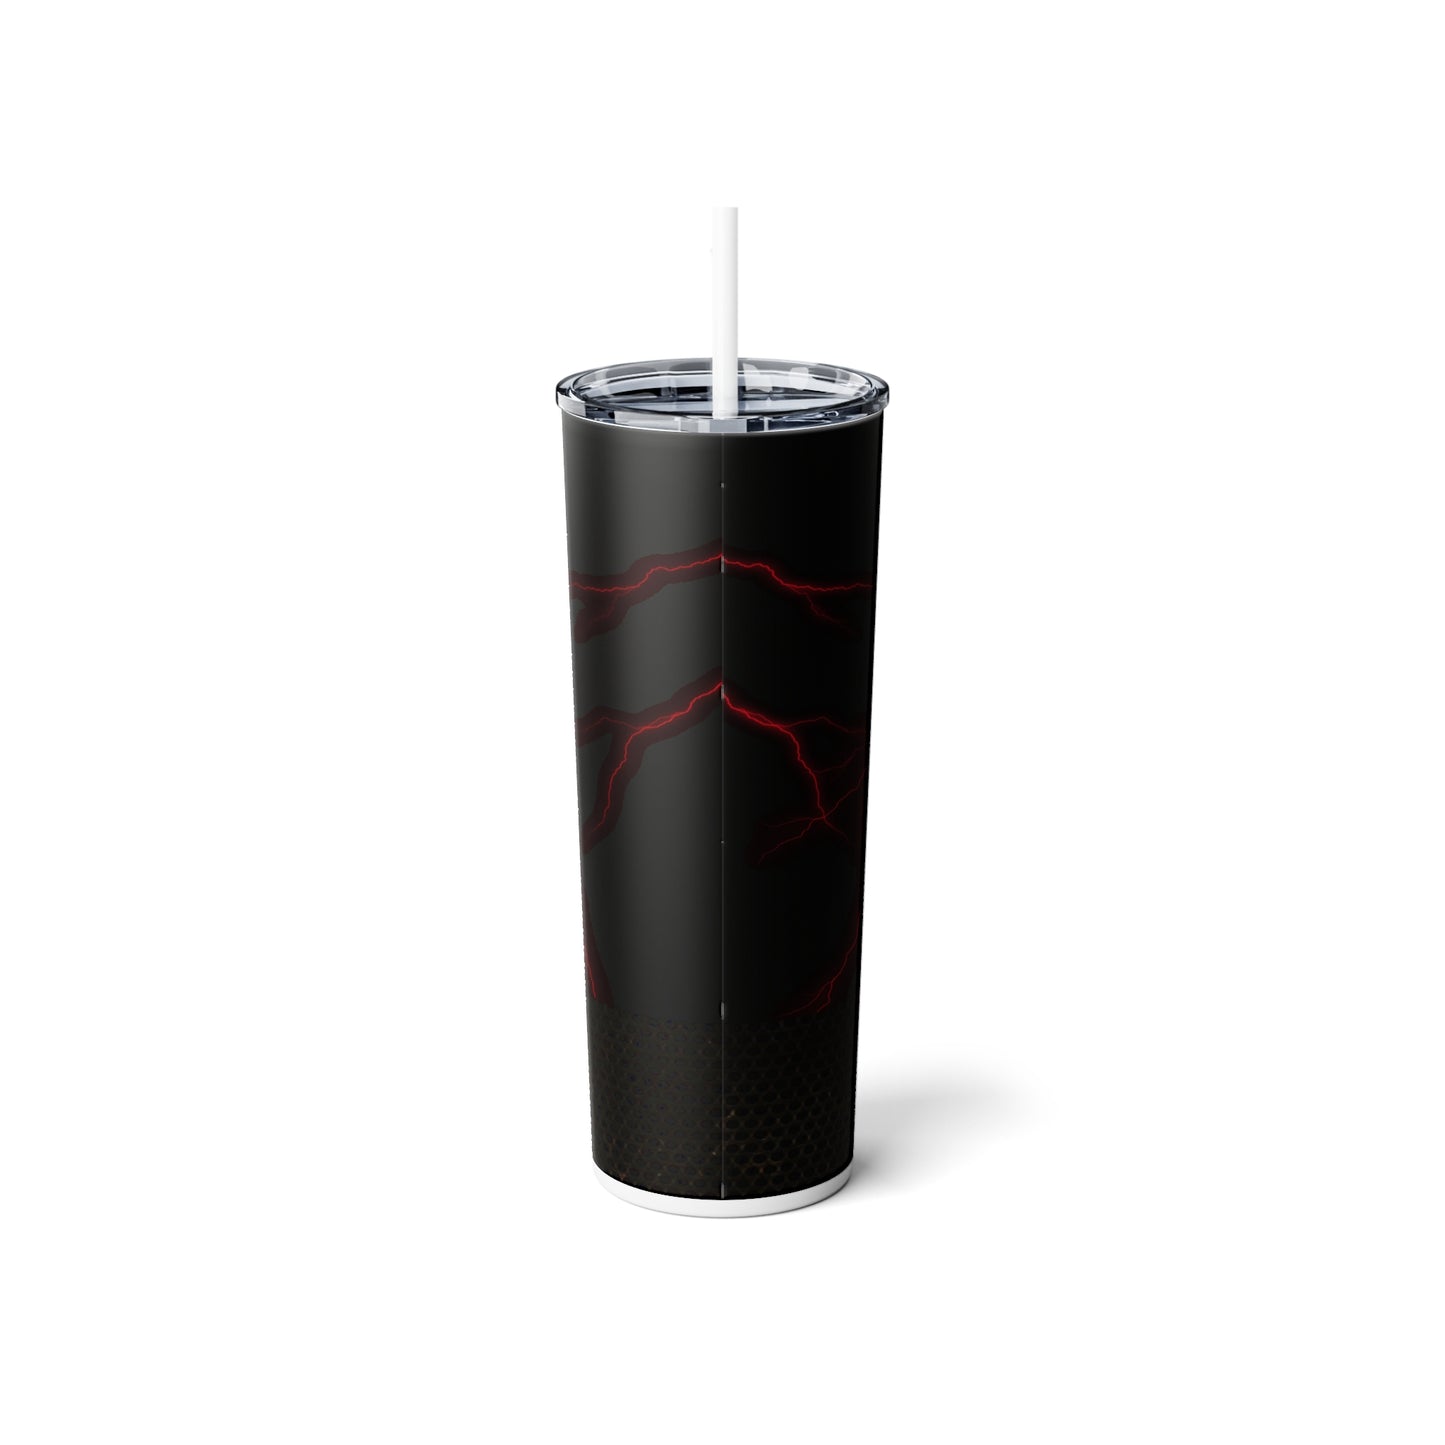 Red Skull with Lightning Skinny Steel Tumbler with Straw